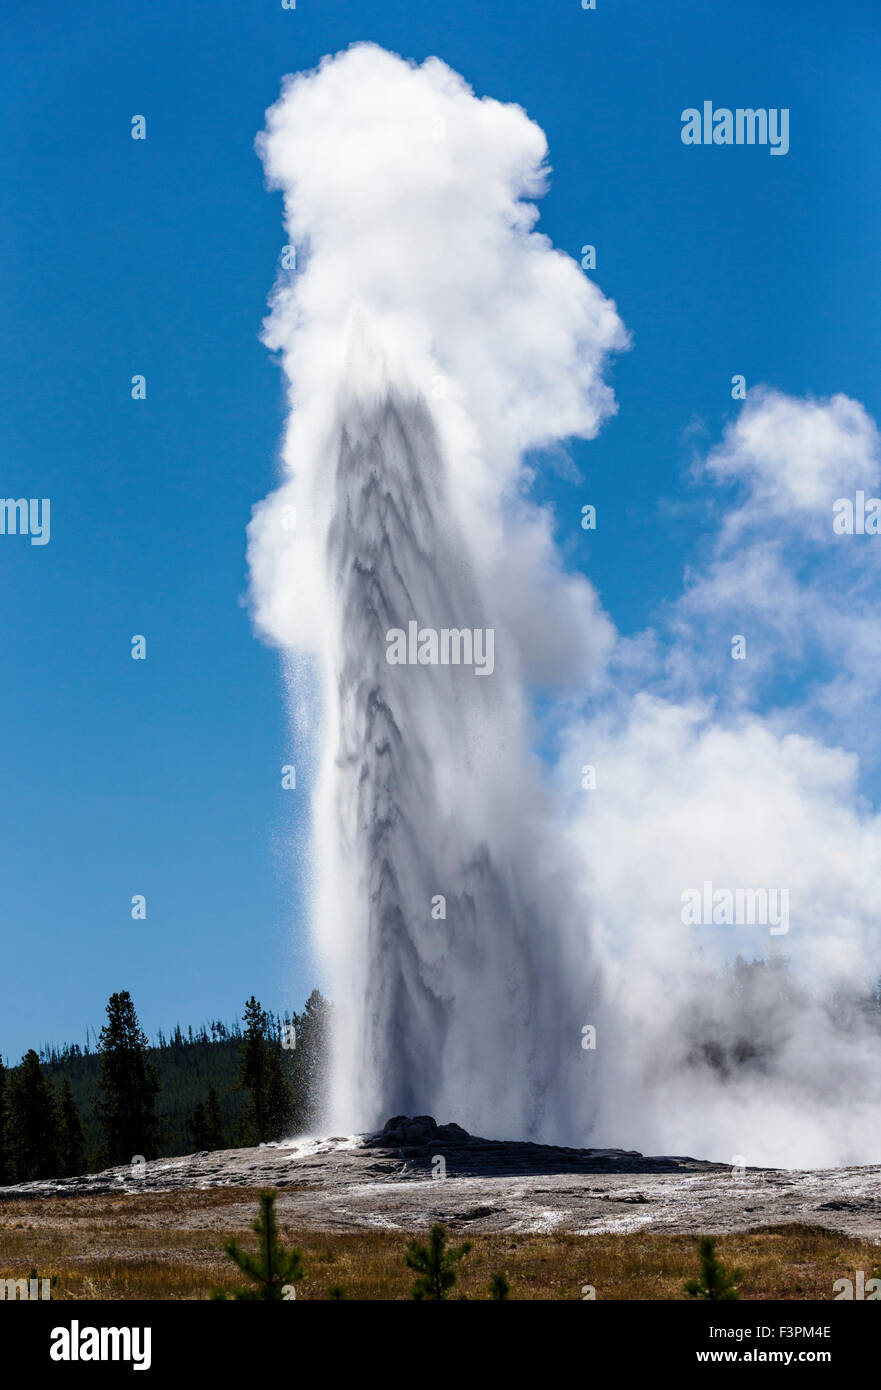 Old Faithful Geyser ; ; Parc National de Yellowstone, Wyoming, USA Banque D'Images